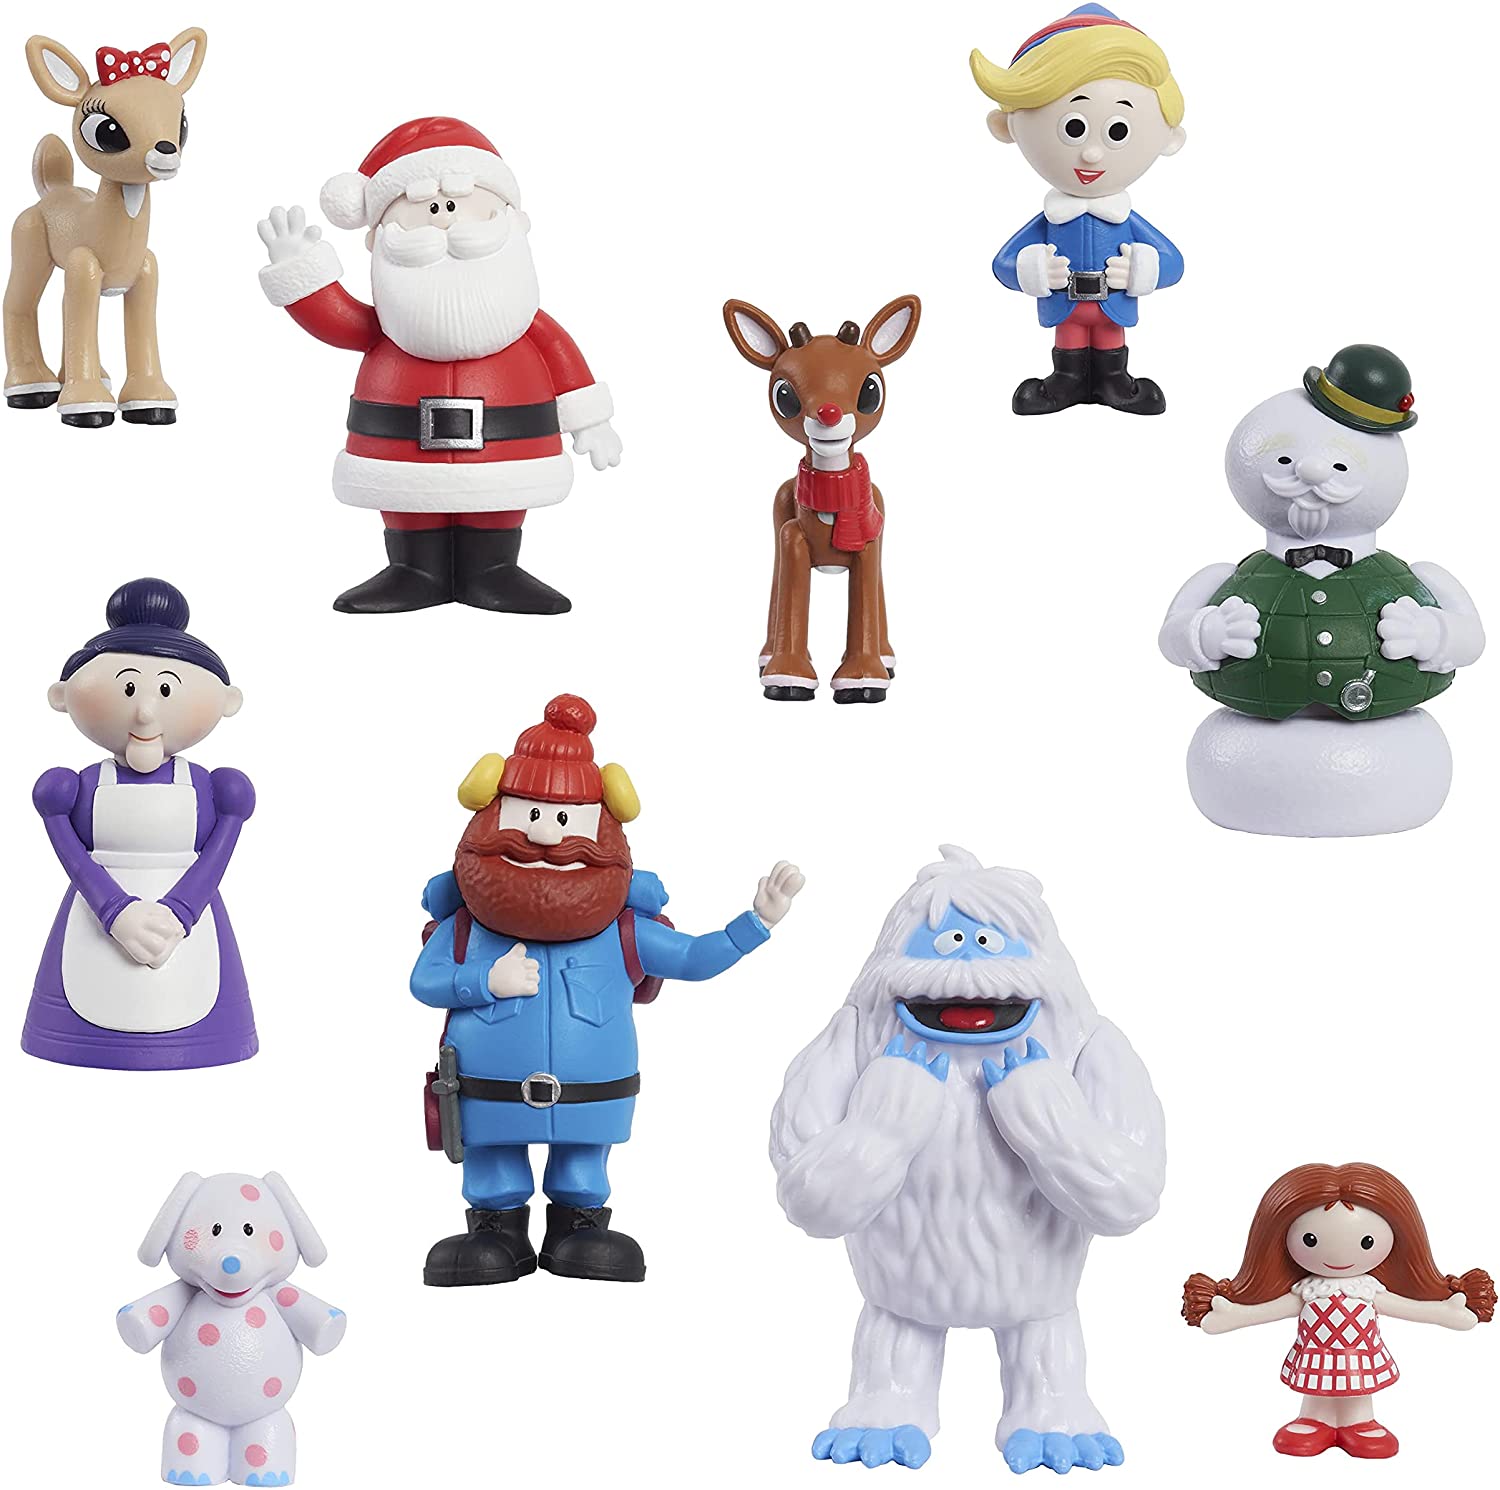 Rudolph The Red Nosed Reindeer 10 Piece Figure Set